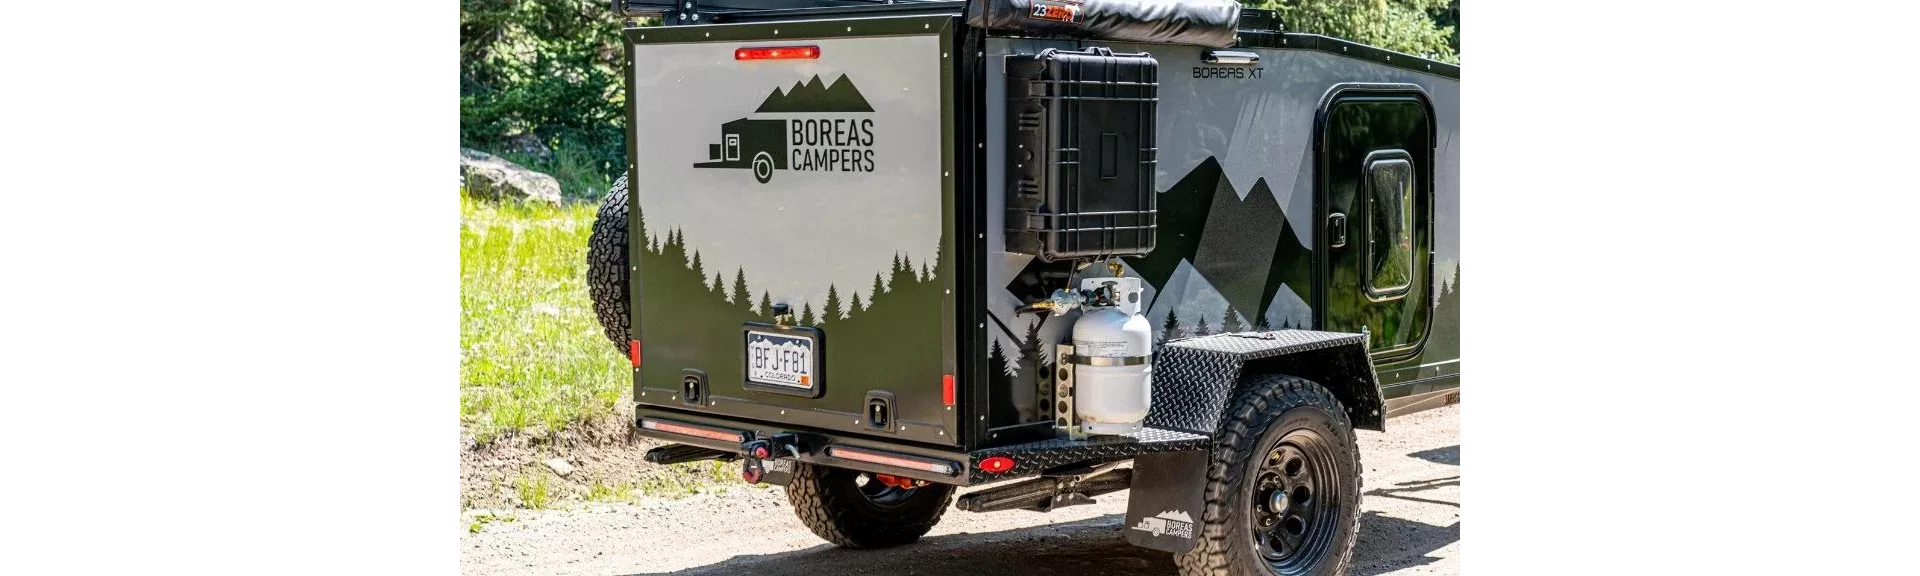 propane options on the Boreas Campers XT offroad camper trailer